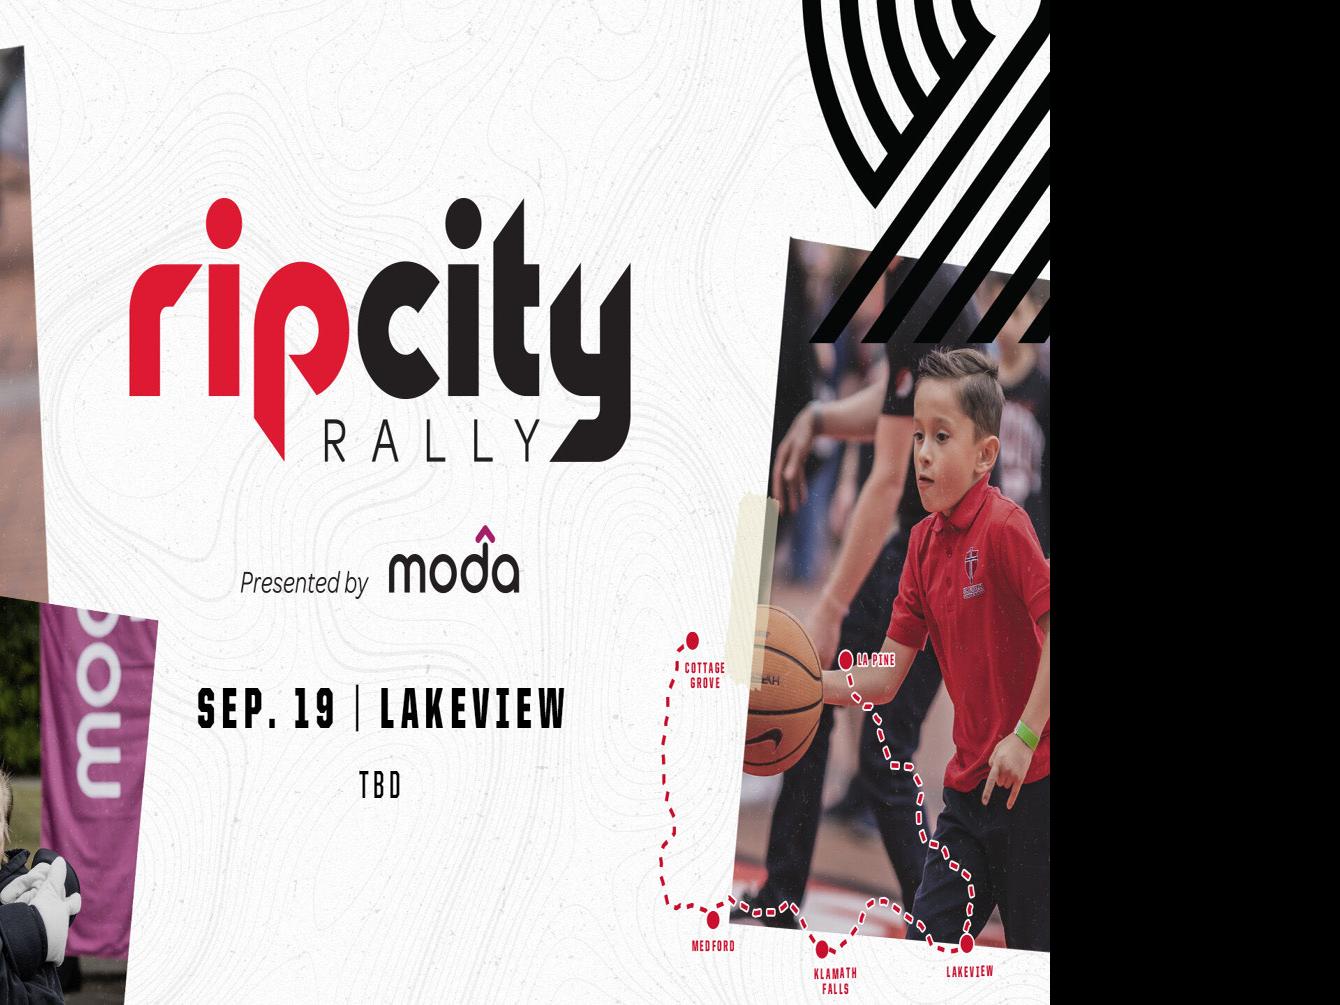 The Portland Trail Blazers Rip City Rally is about to kick off